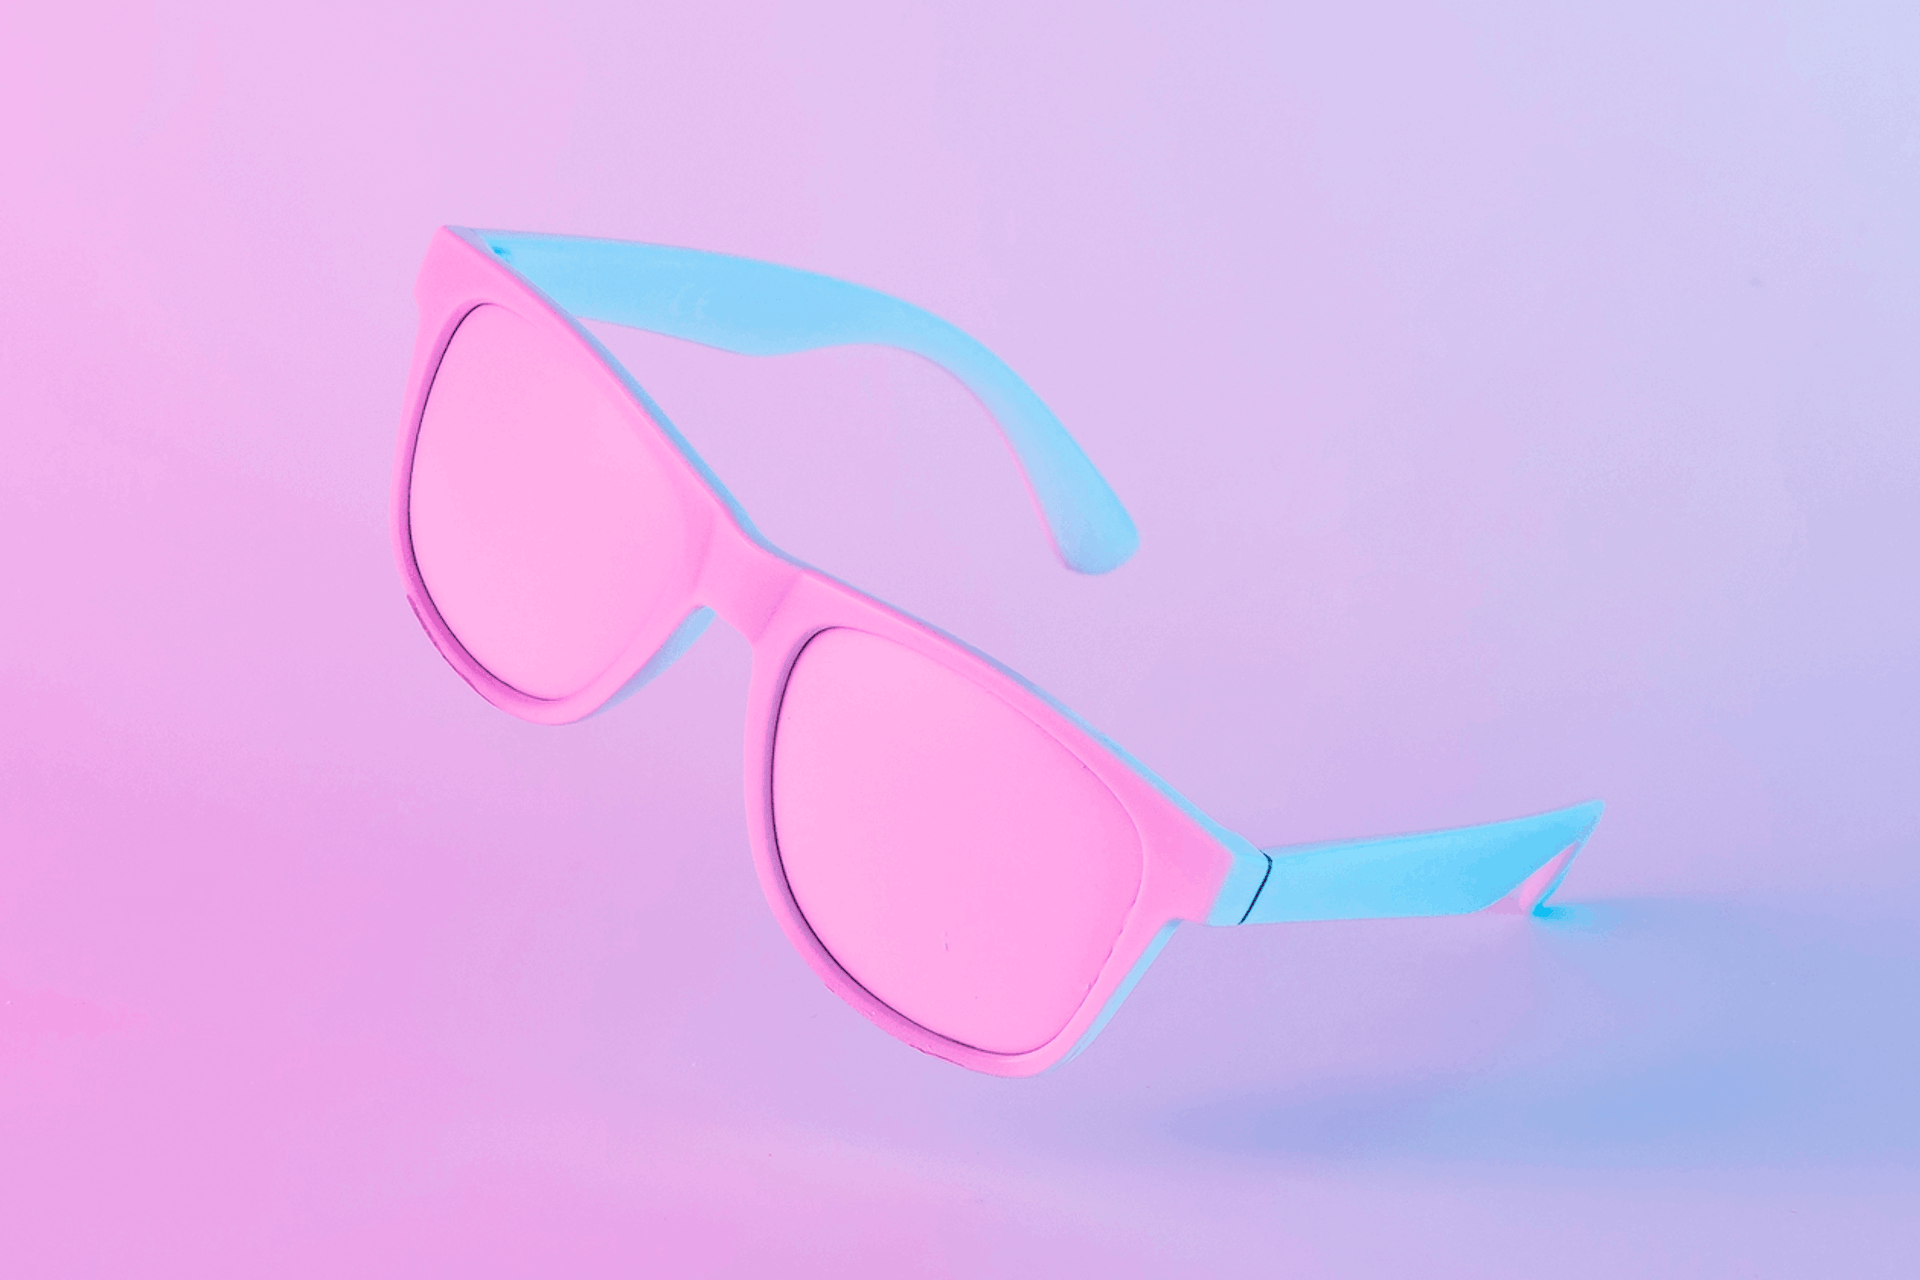 A pair of pink and blue sunglasses on a pink background. The sunglasses appear ad if they are being photographed for a fashion photoshoot that an instagram influencer in South Africa may share on his/her account.